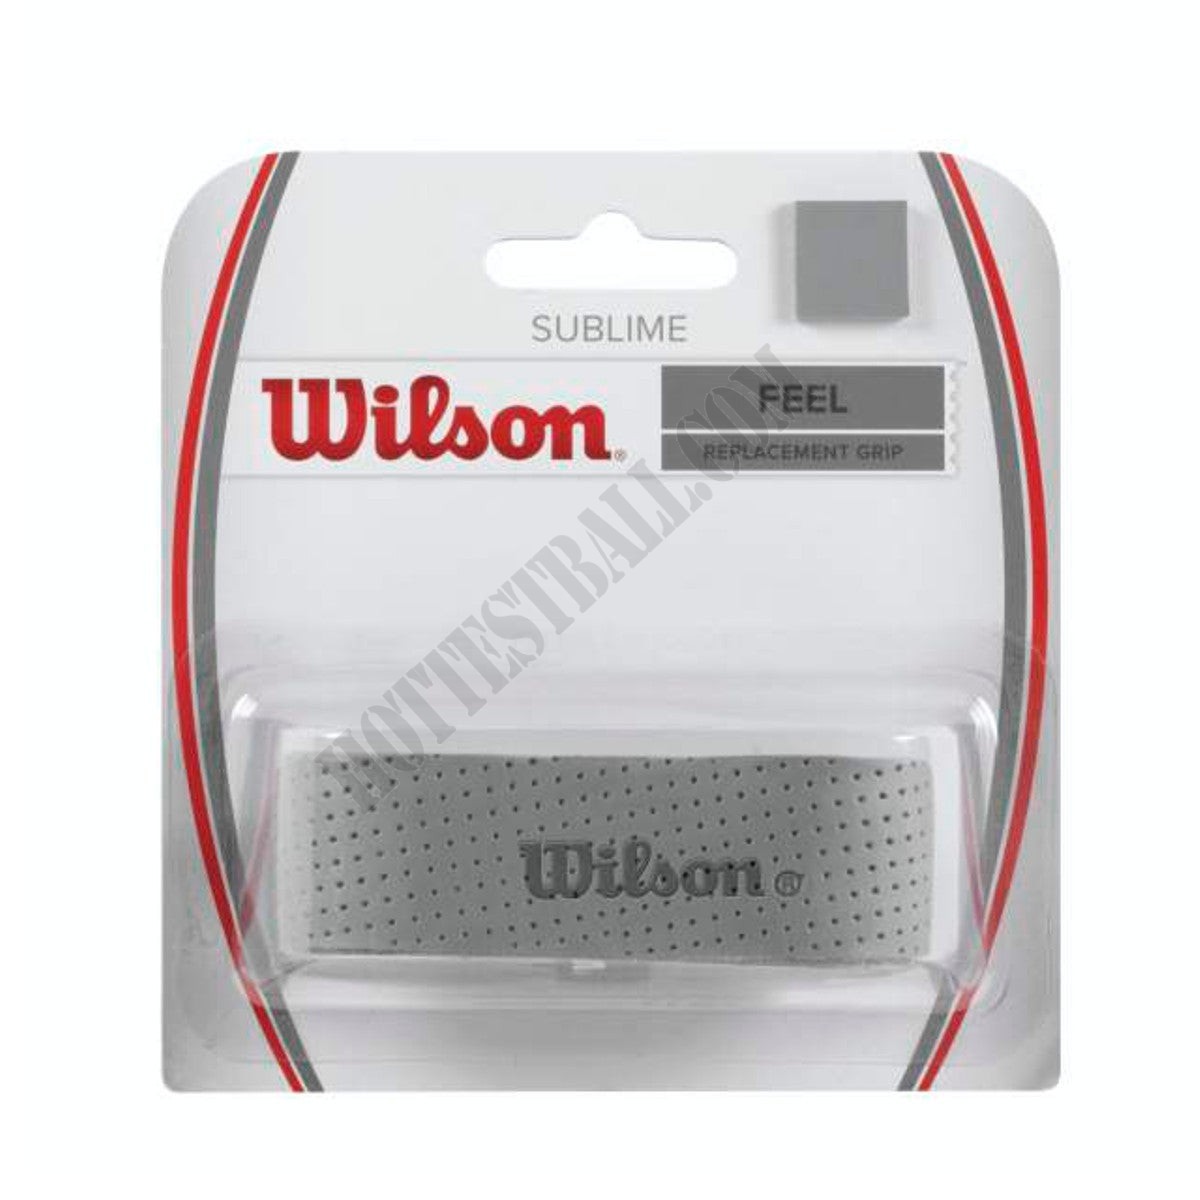 Sublime Replacement Grip - Wilson Discount Store - -5